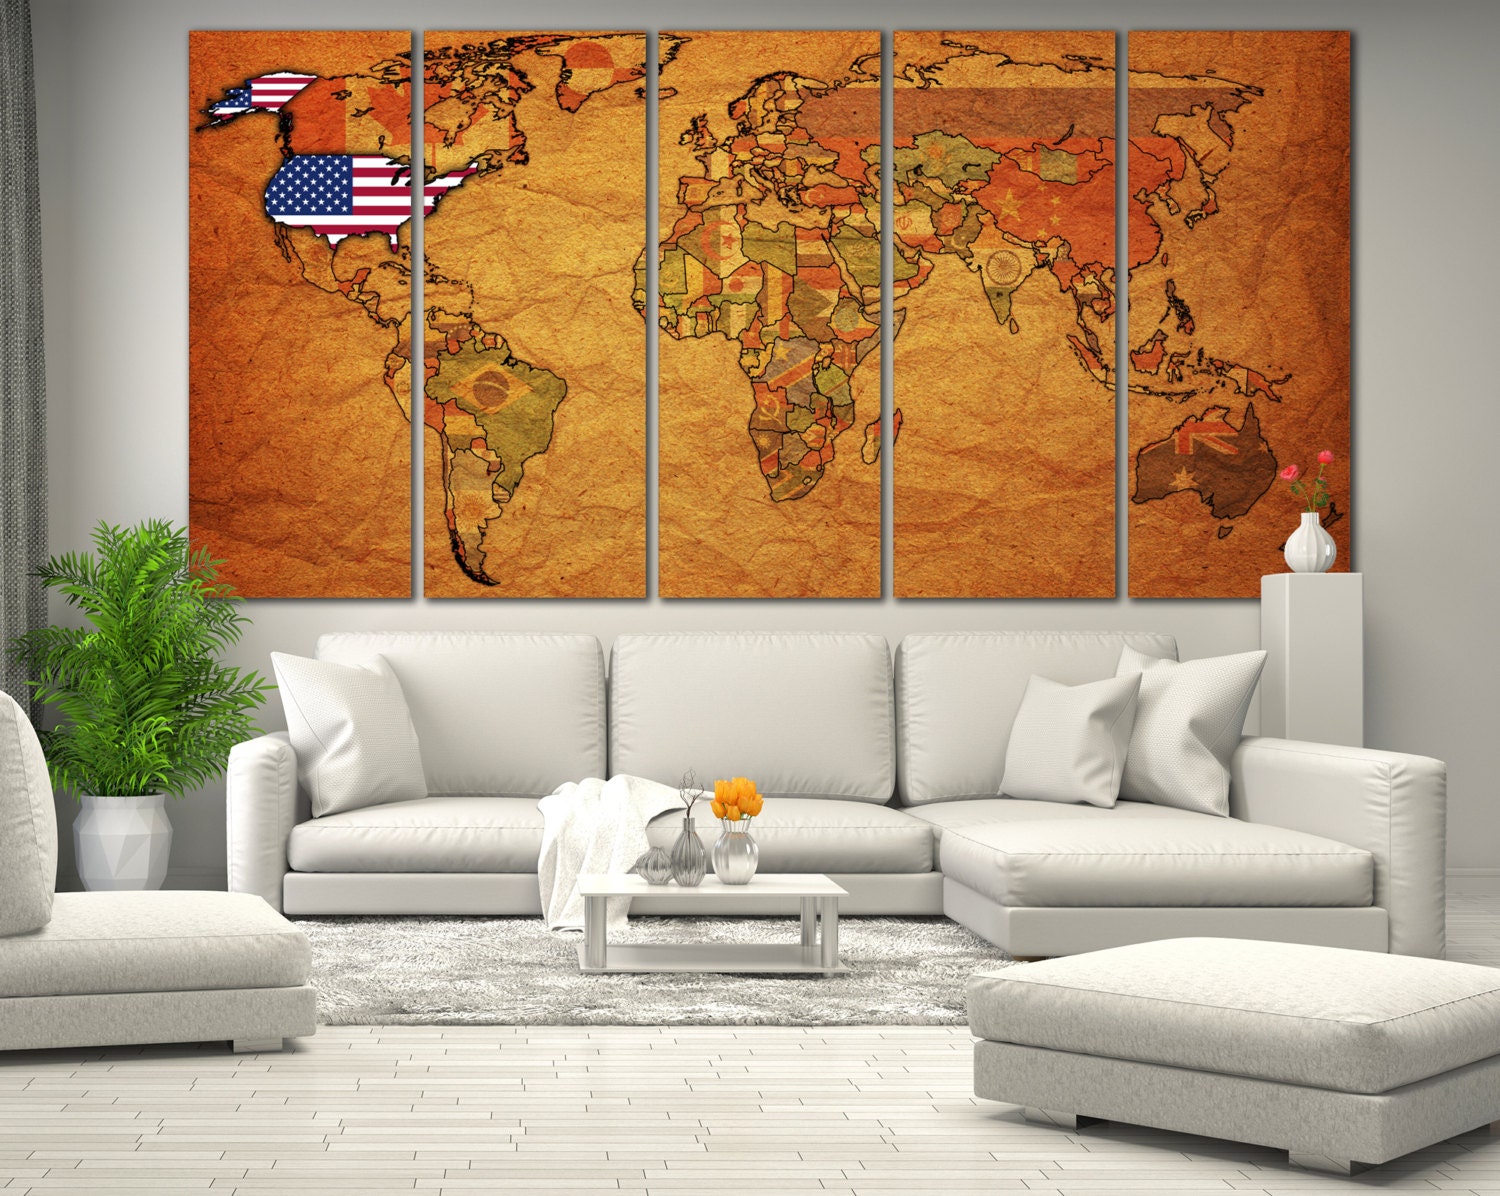 Large Wall Art World Map Canvas Print Large World By Zellartco